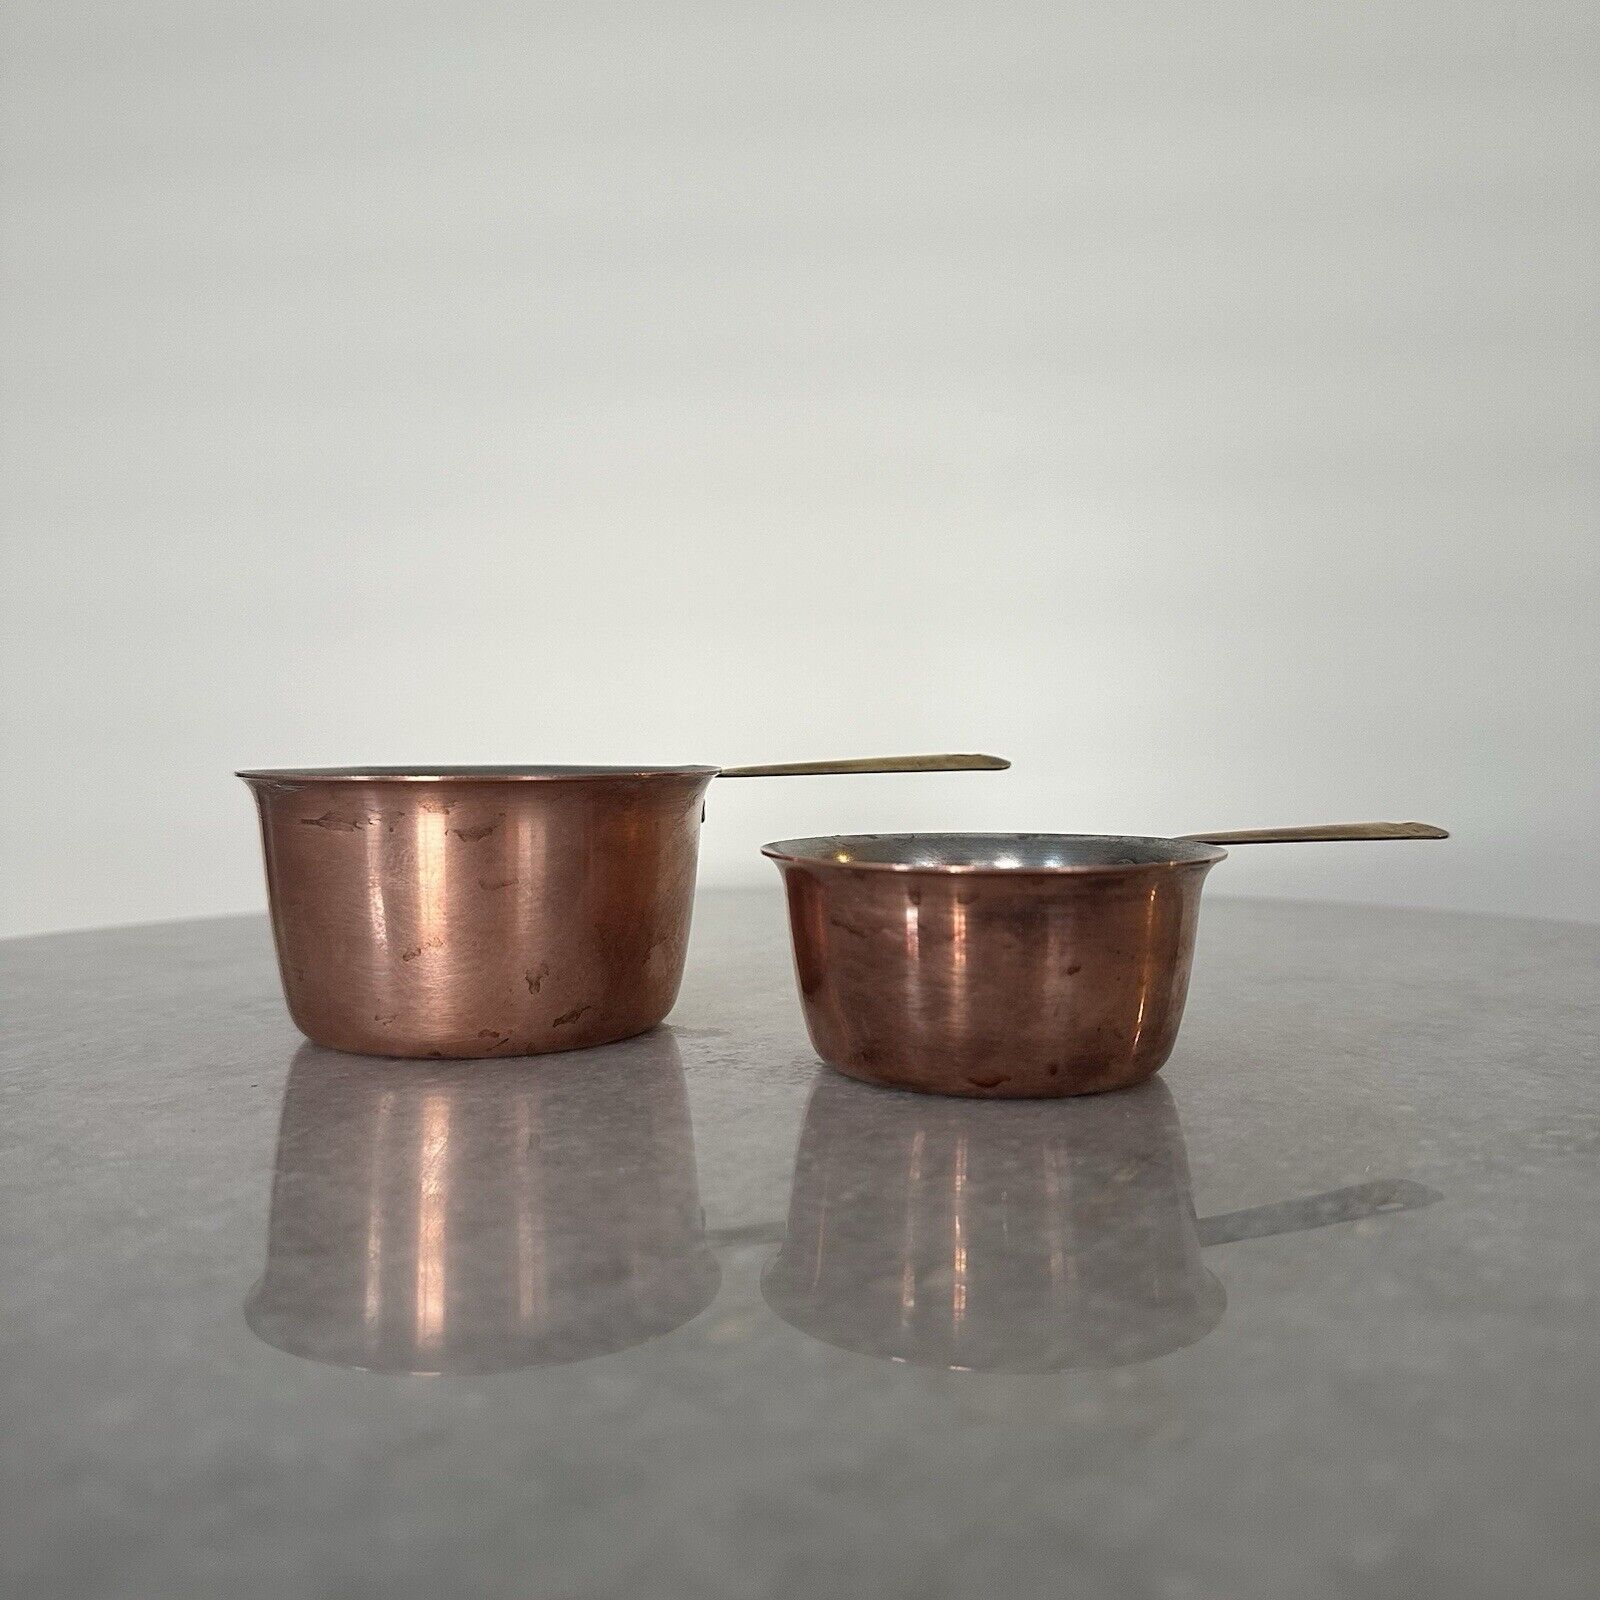 Set of Two Vintage Mini Copper Pots with Brass Handles Measuring Cups